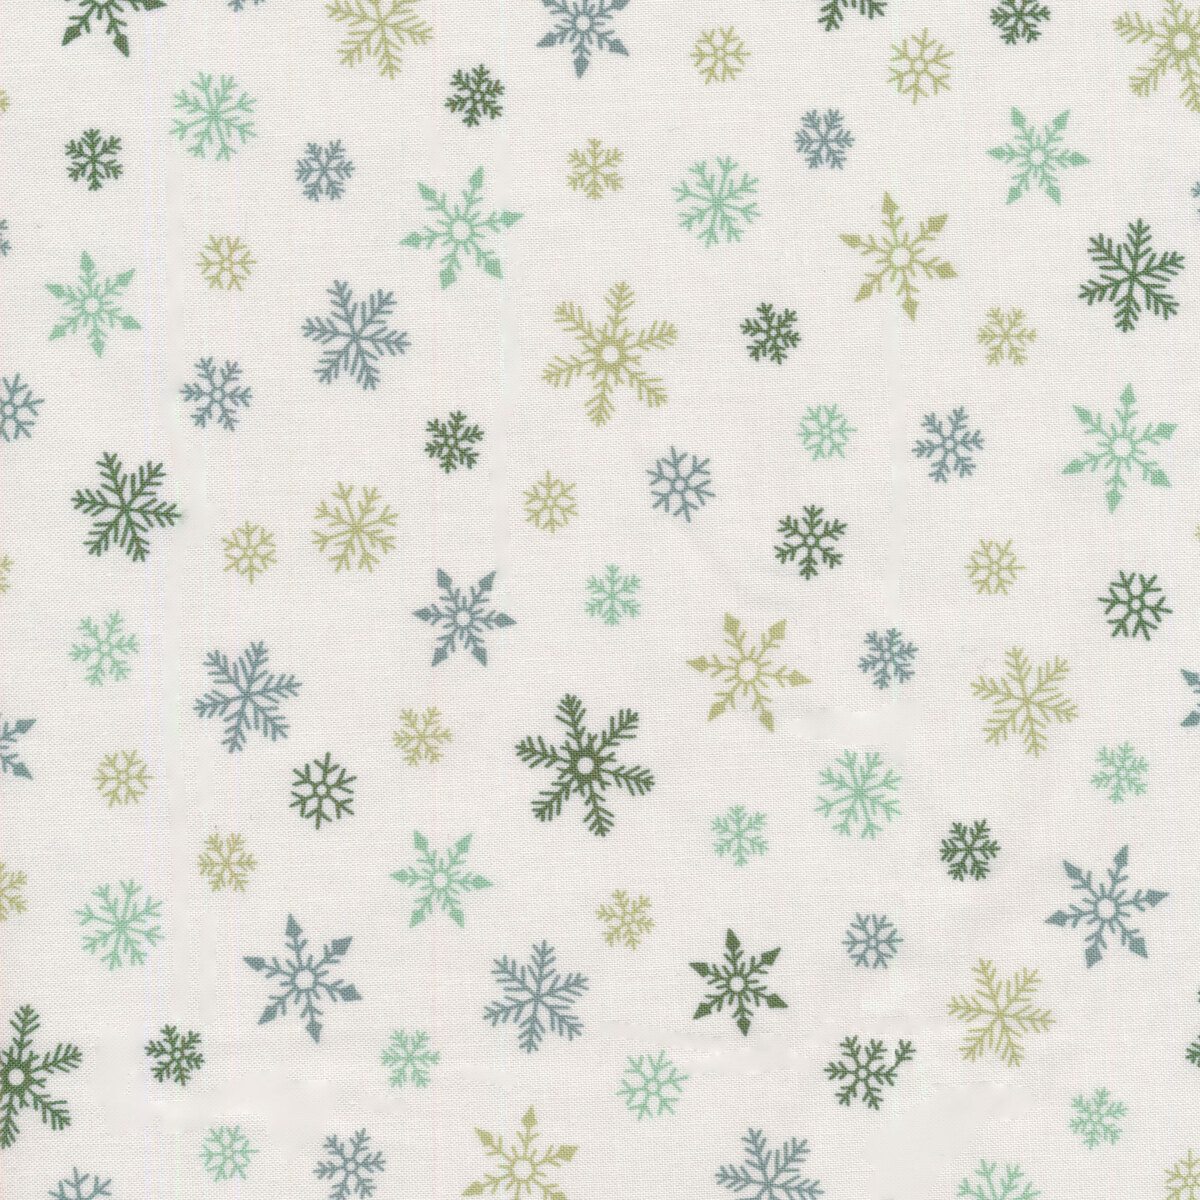 Holidays at Home 56077-21 Snowy White by Deb Strain for Moda Fabrics ...